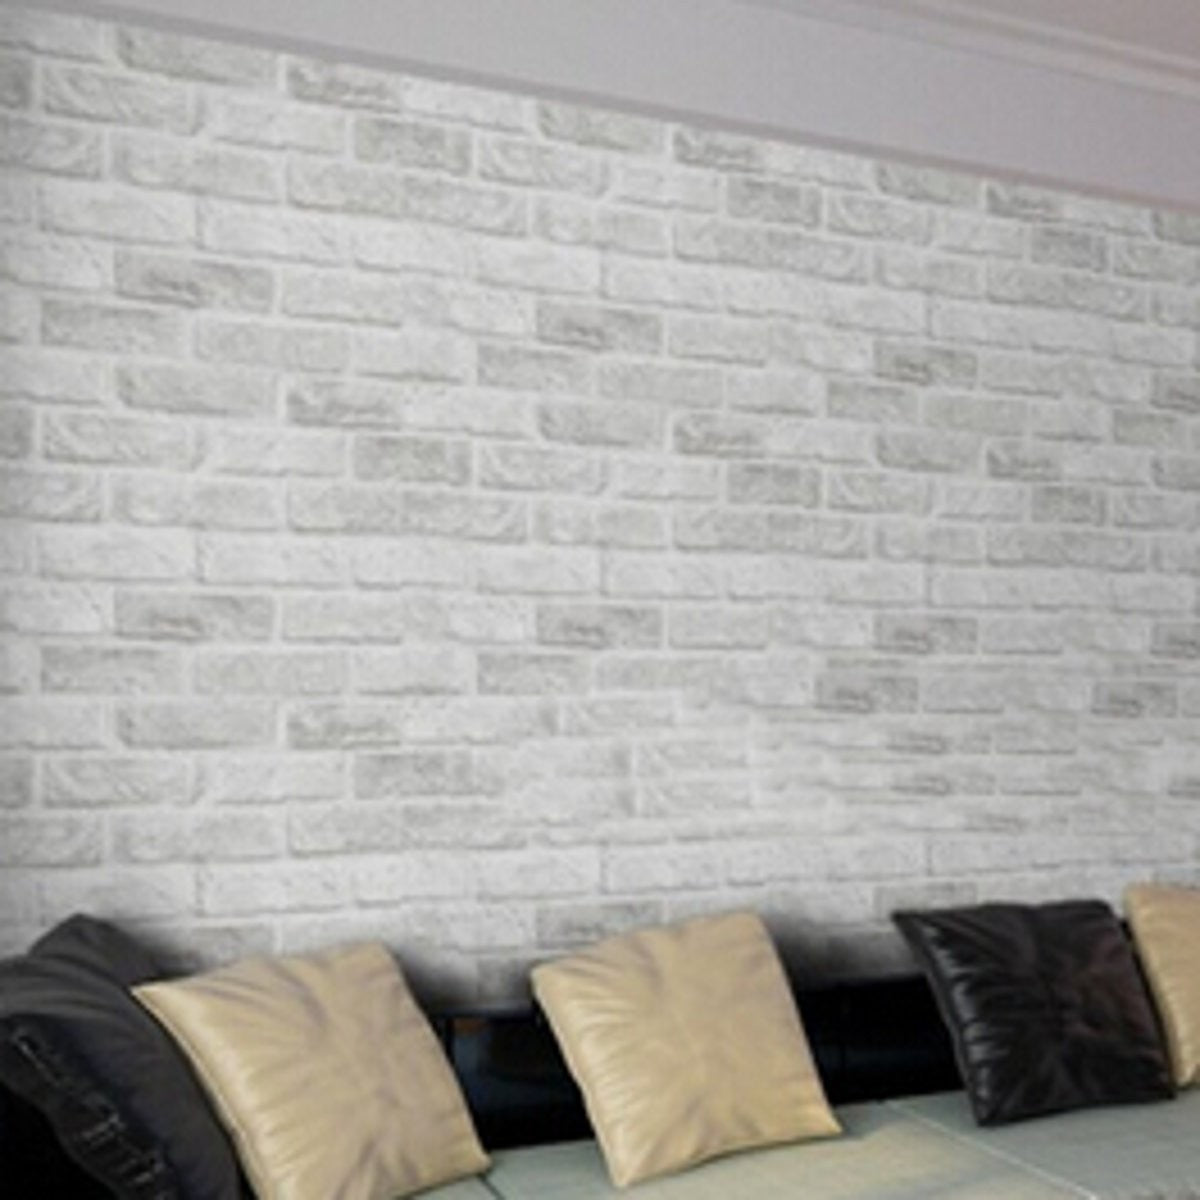 10m White Grey Brick Stone Prepasted Adhesive Contact Paper Wallpaper Roll Wall Art Decor